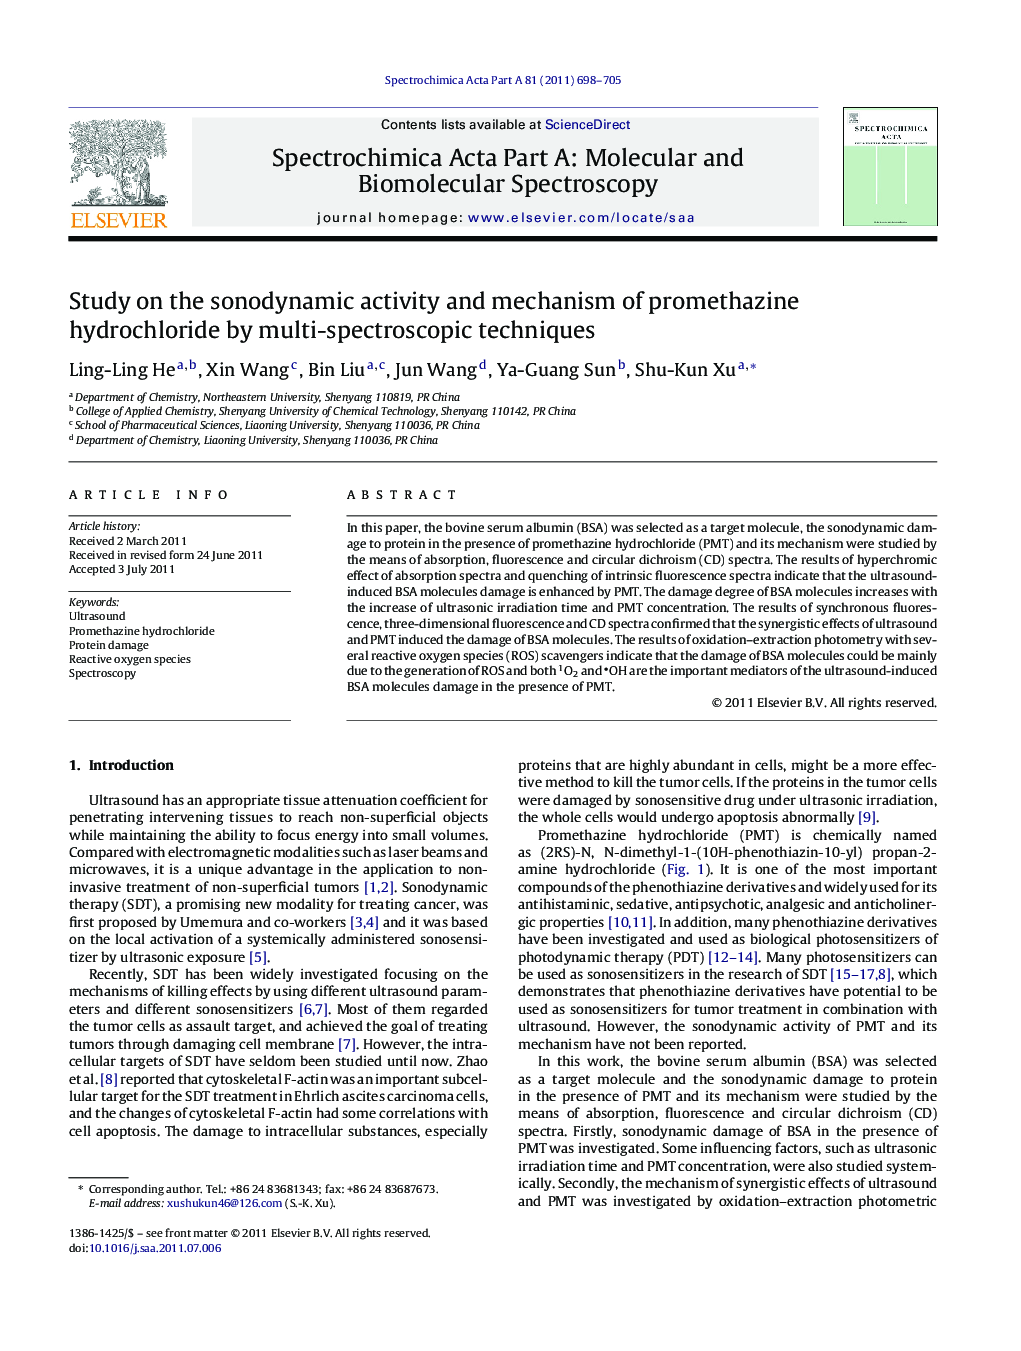 Study on the sonodynamic activity and mechanism of promethazine hydrochloride by multi-spectroscopic techniques